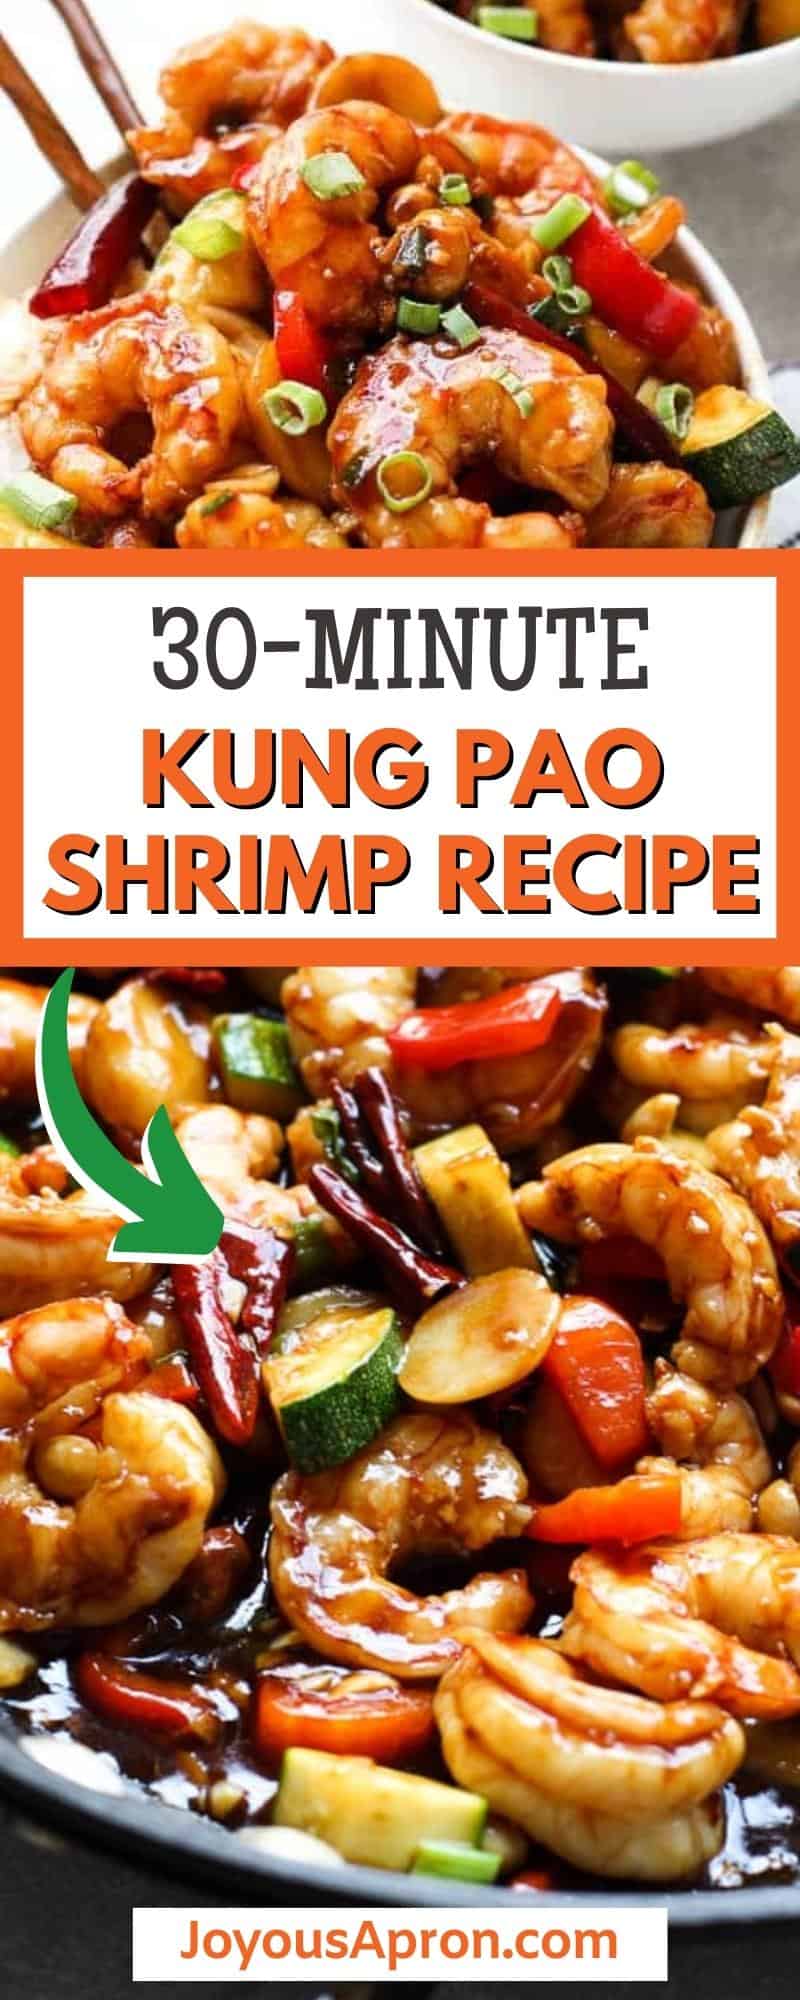 Kung Pao Shrimp - easy, healthy and delicious Asian seafood dish! Delicious shrimp stir fry dish tossed in a homemade Kung Pao sauce, combined with yummy veggies. Sooo much yummier and healthier than Chinese takeout! via @joyousapron